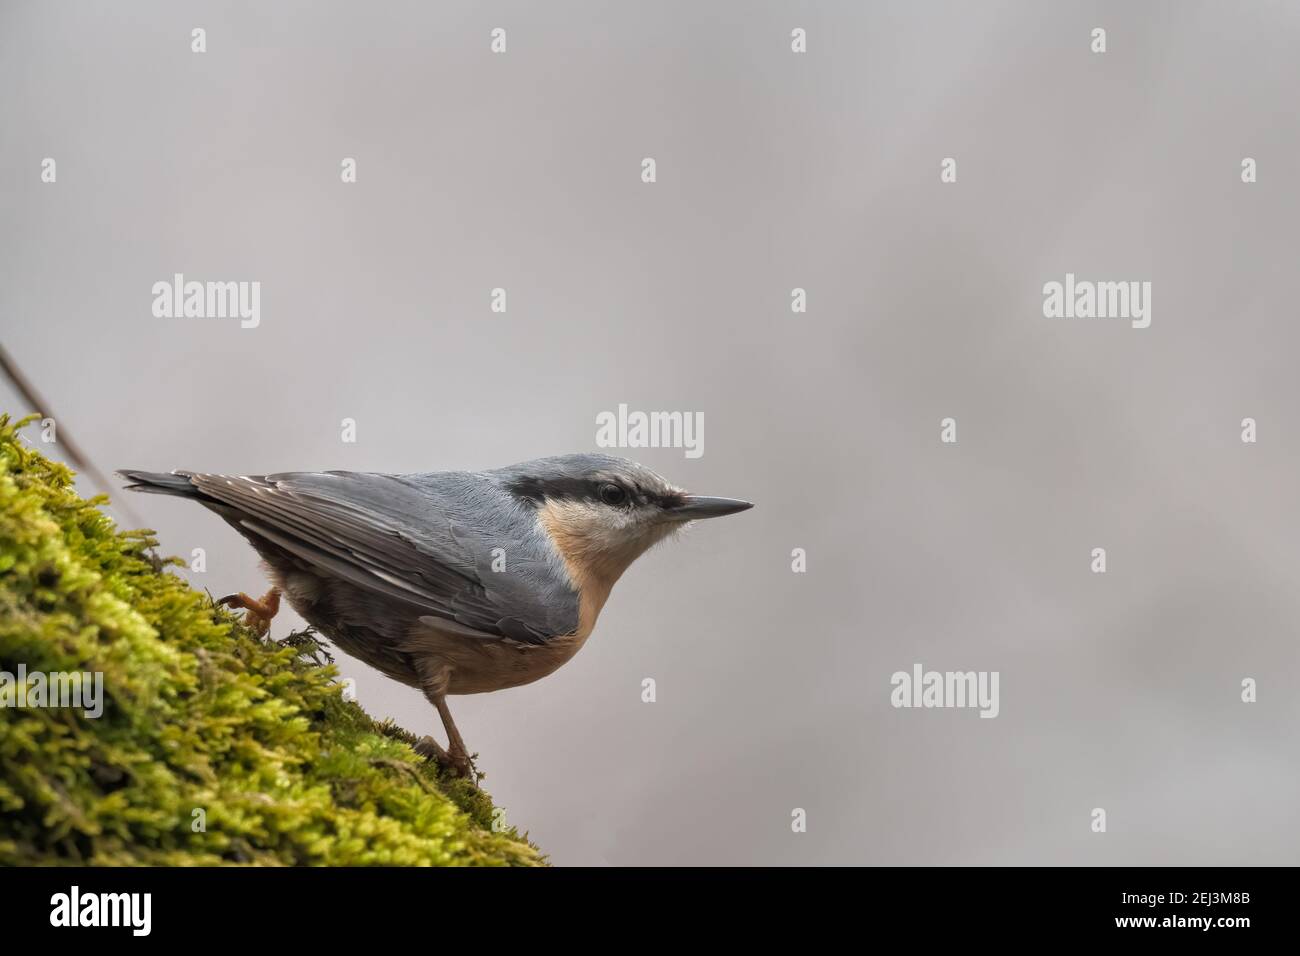 Eurasian nuthatch, Wood nuthatch, Sitta europaea, clinging to a branch Stock Photo